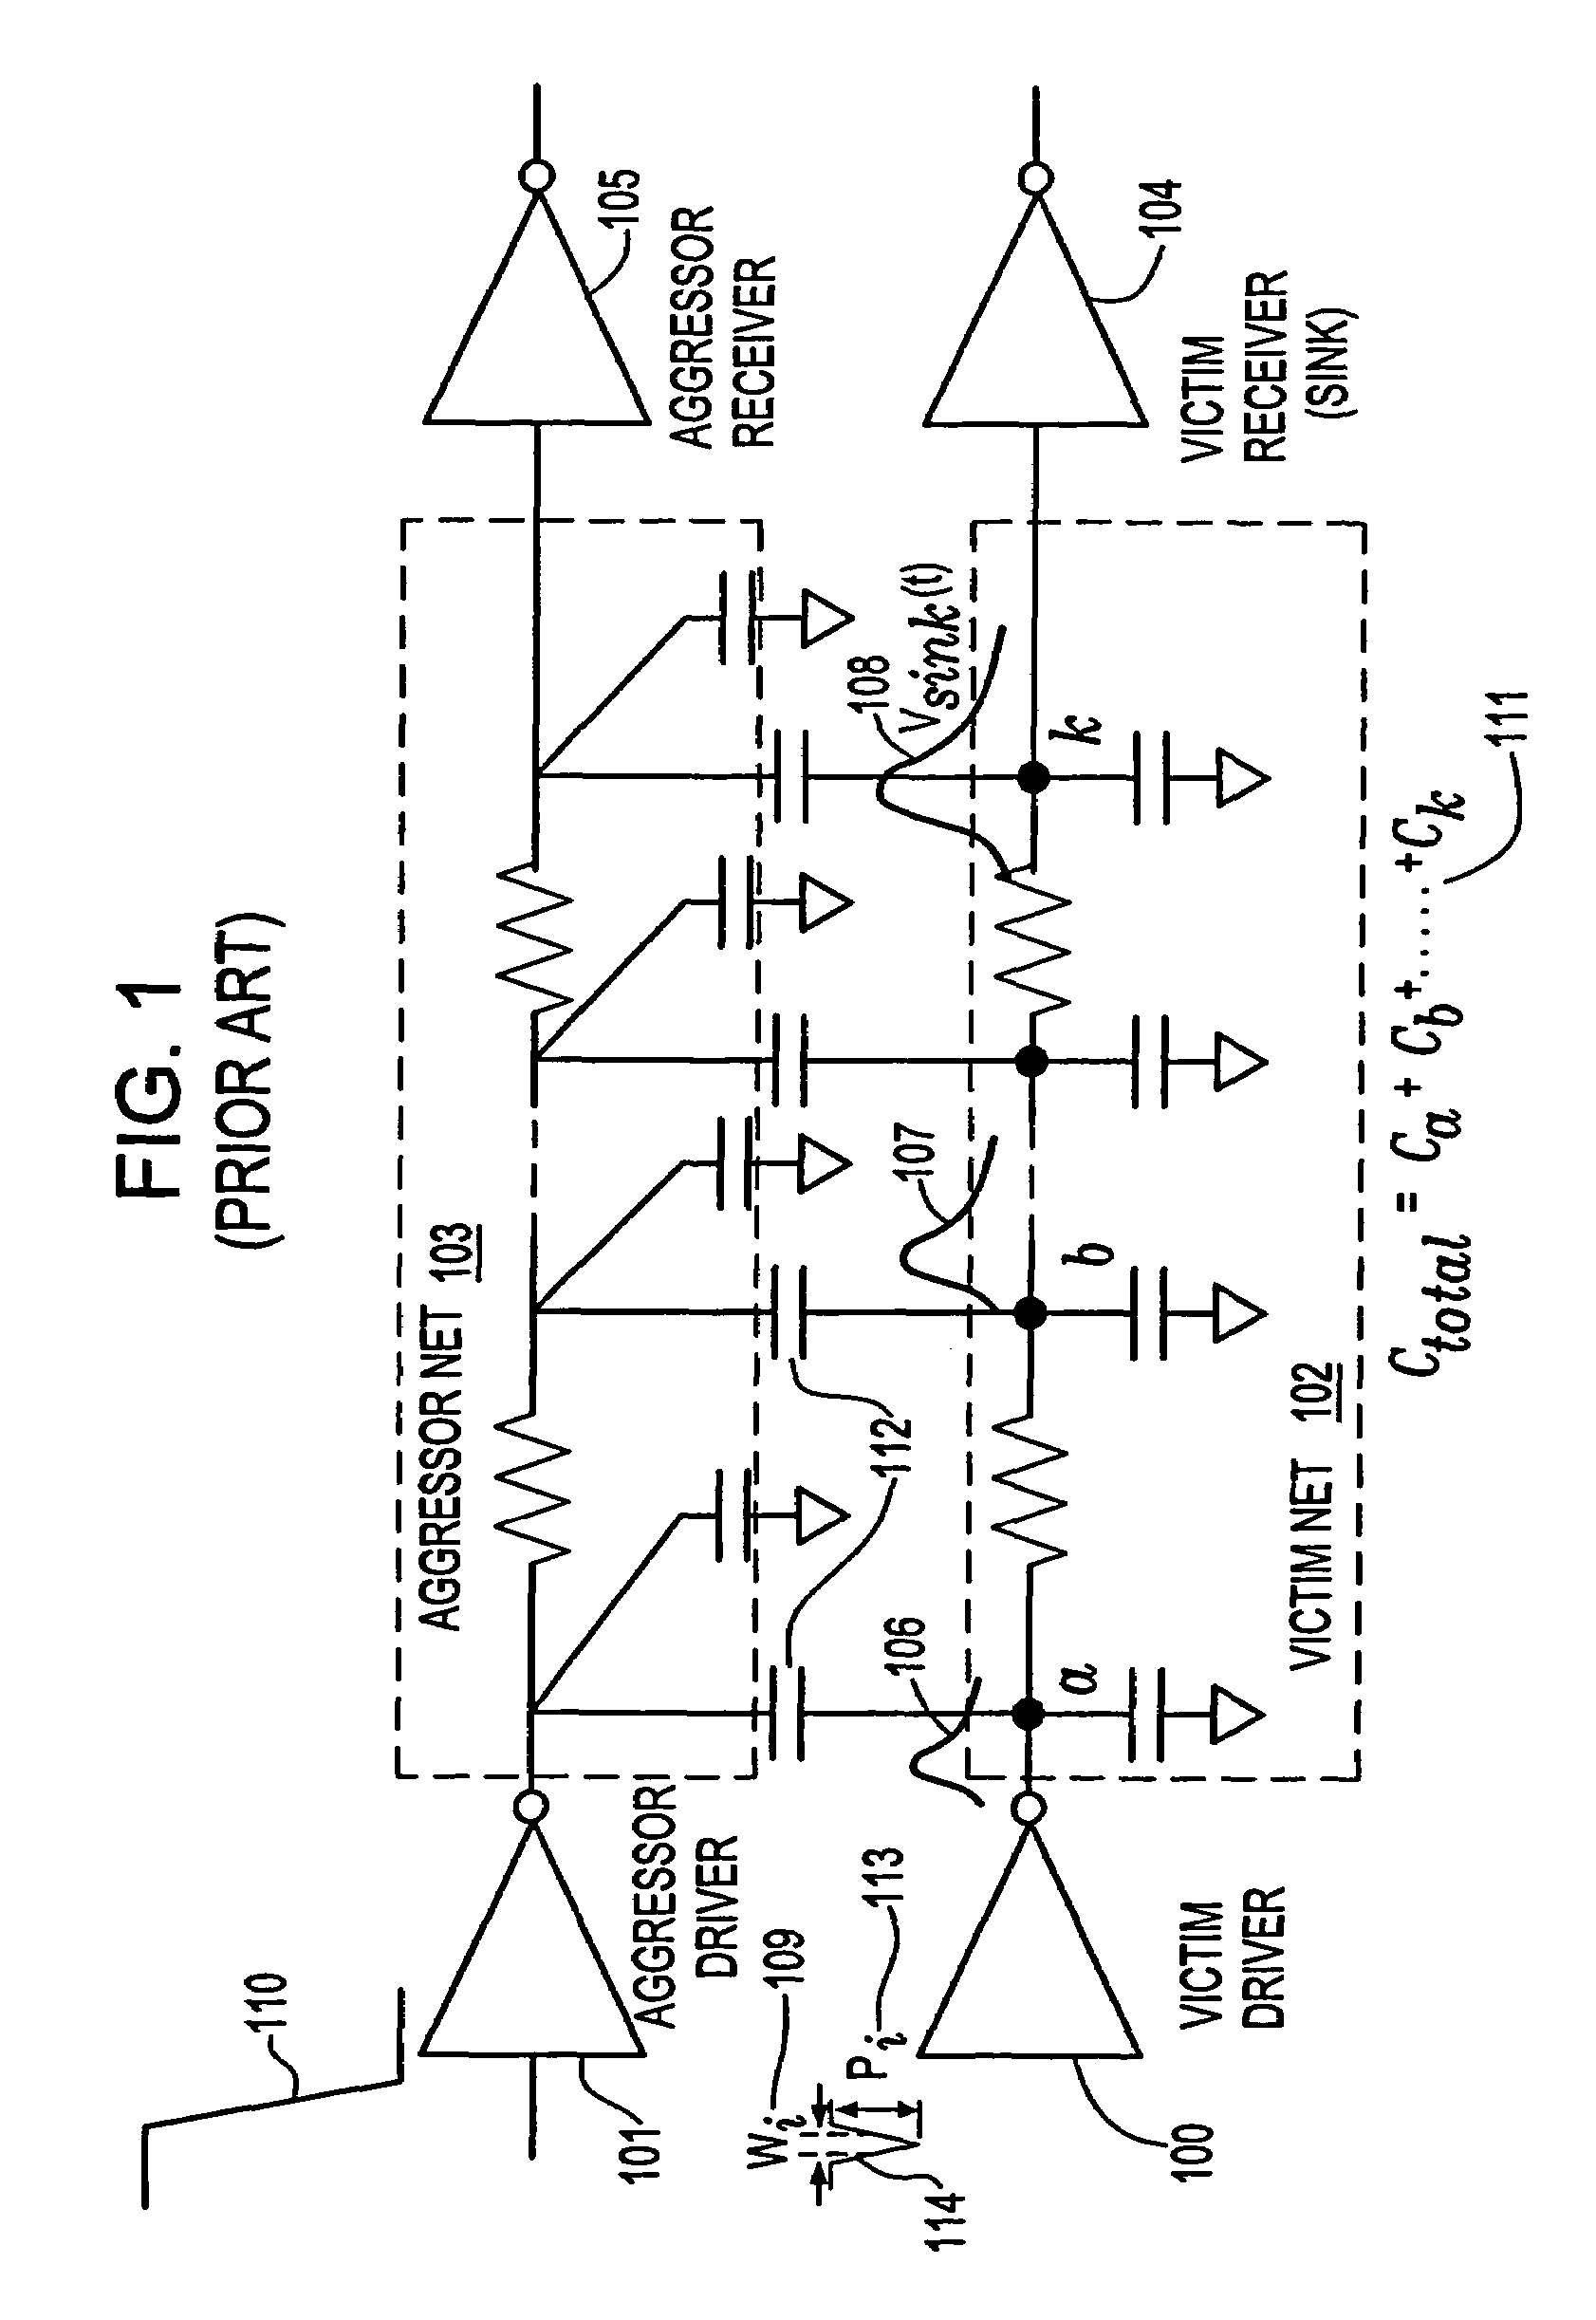 Method for estimating propagation noise based on effective capacitance in an integrated circuit chip